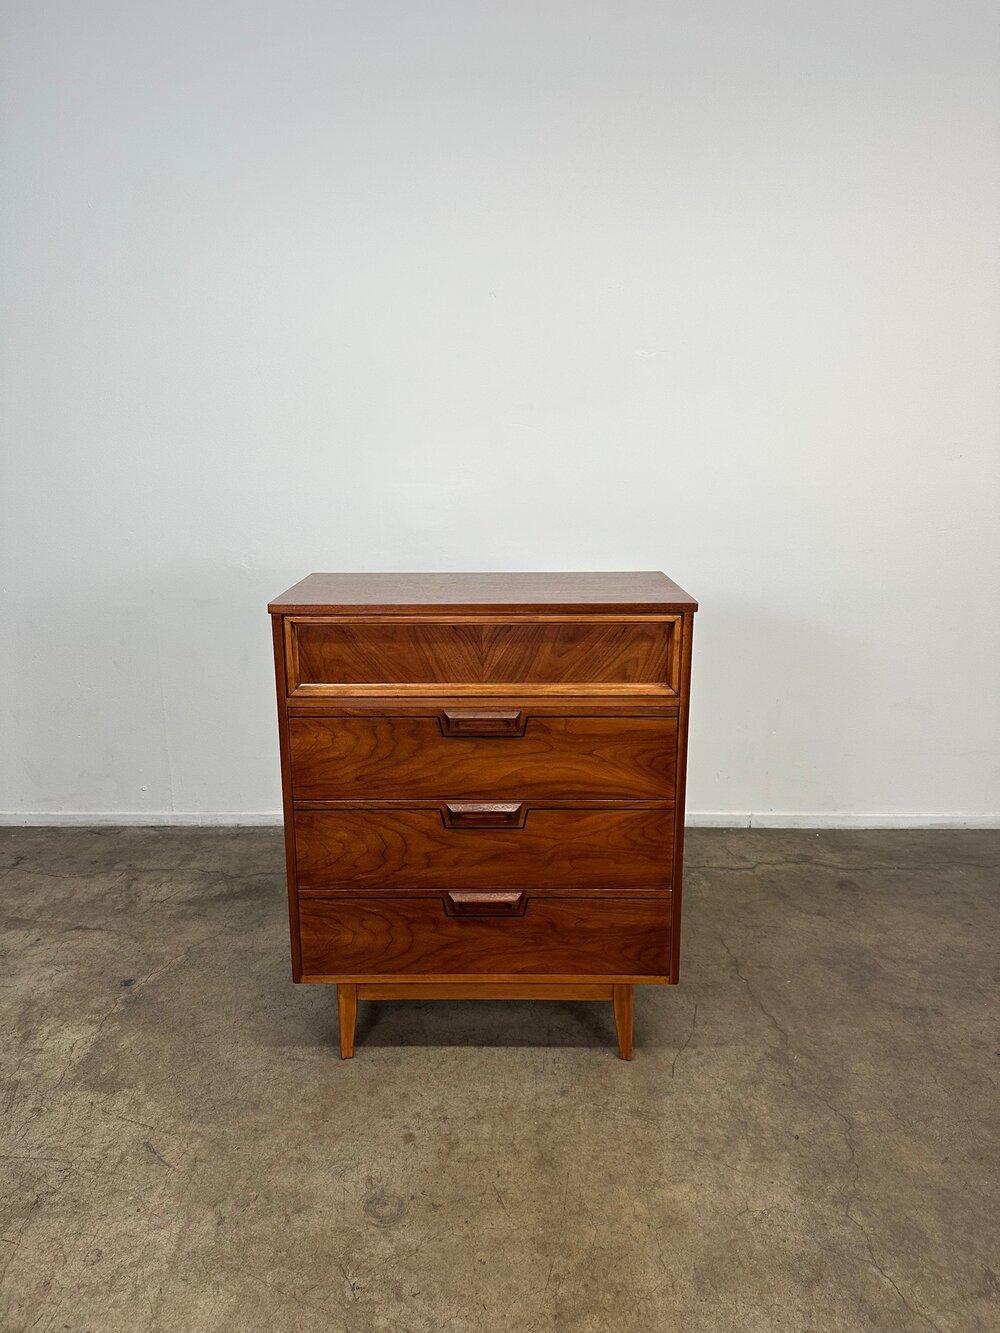 W34 D18 H41.5

Vintage modern Highboy dresser fully restored smooth sliding 4 drawer with solid wood handles. Clean interior drawers, dovetail drawers, and solid wood interior. The wood box has a strong grain walnut veneer, we have refinished down